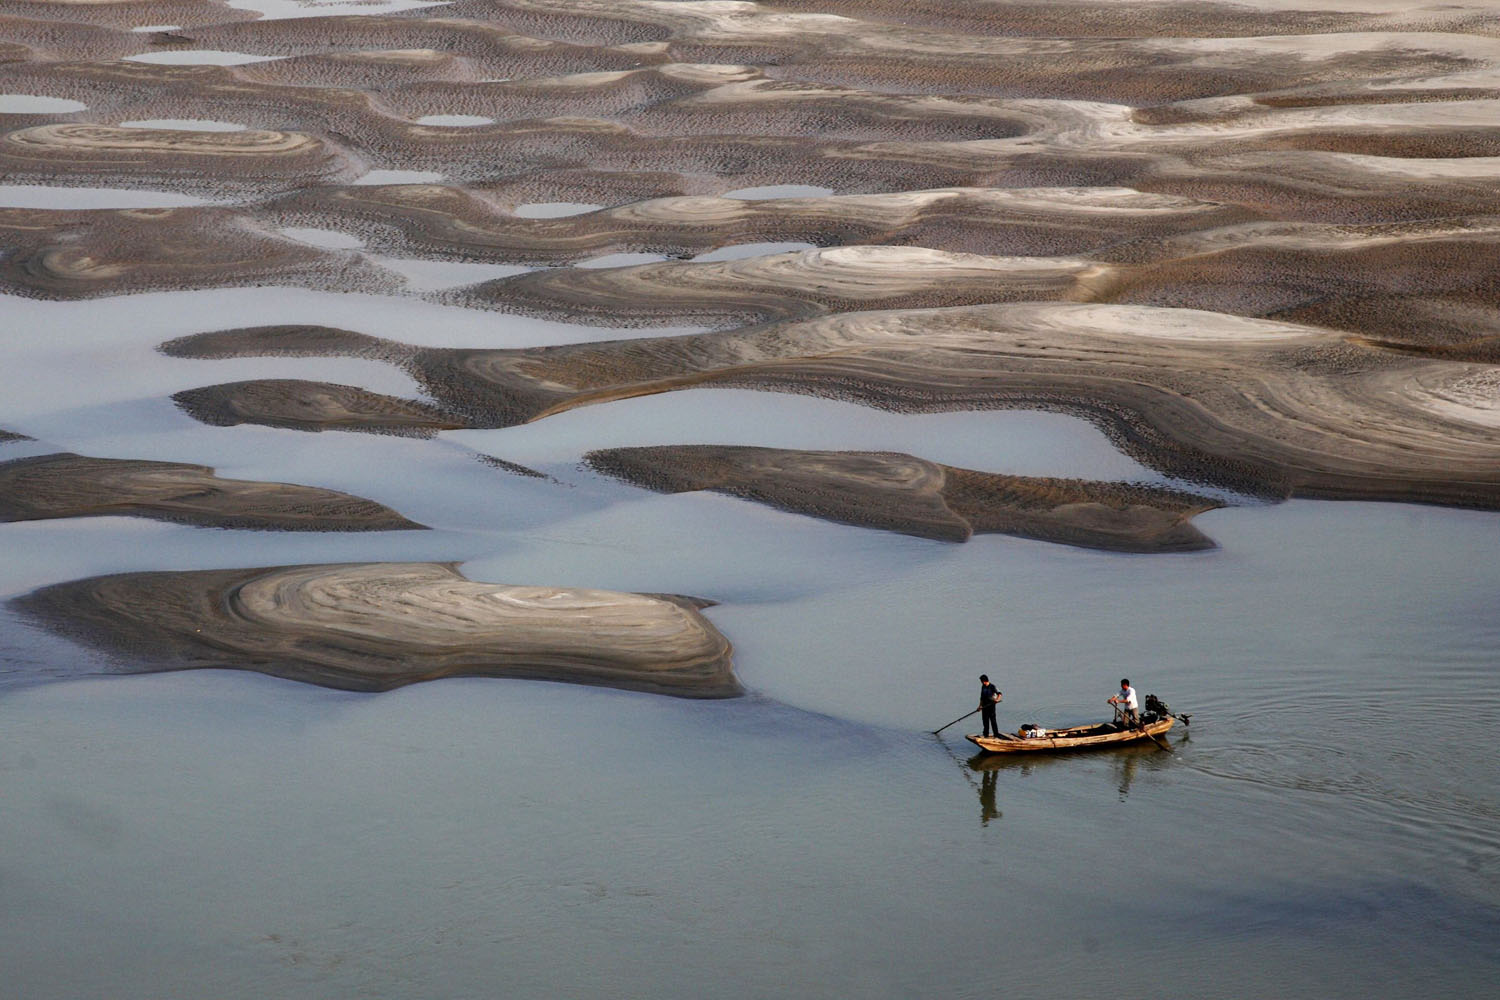 Oct. 27, 2013. Two men row a boat past a partially dried-up riverbed on a section of the Yangtze River in Jiujiang, Jiangxi province, China.